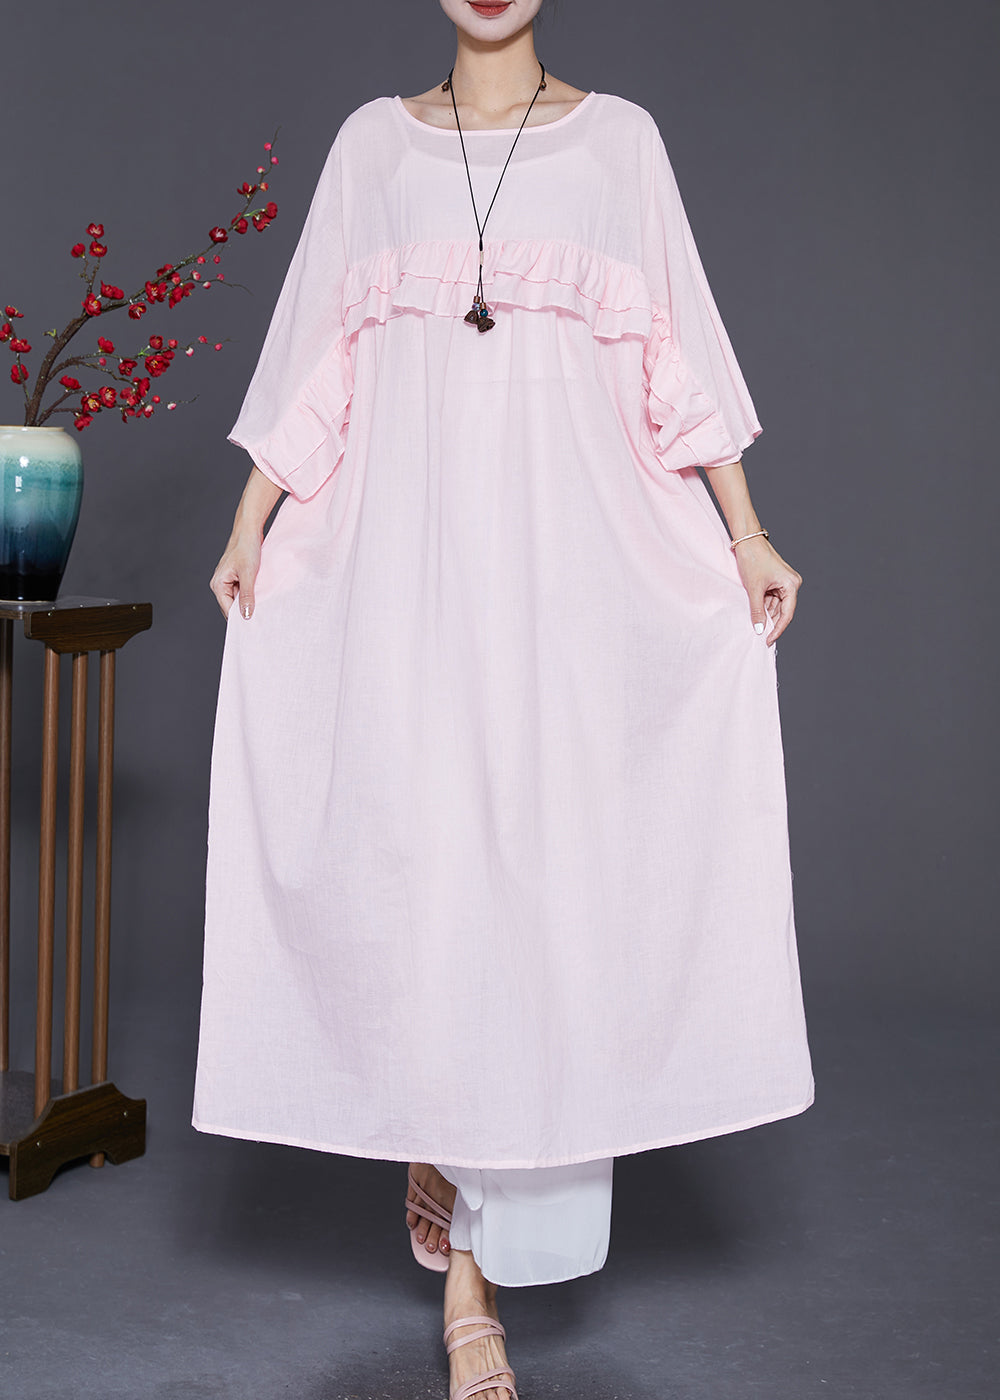 Natural Pink Ruffled Patchwork Linen Robe Dresses Batwing Sleeve Ada Fashion